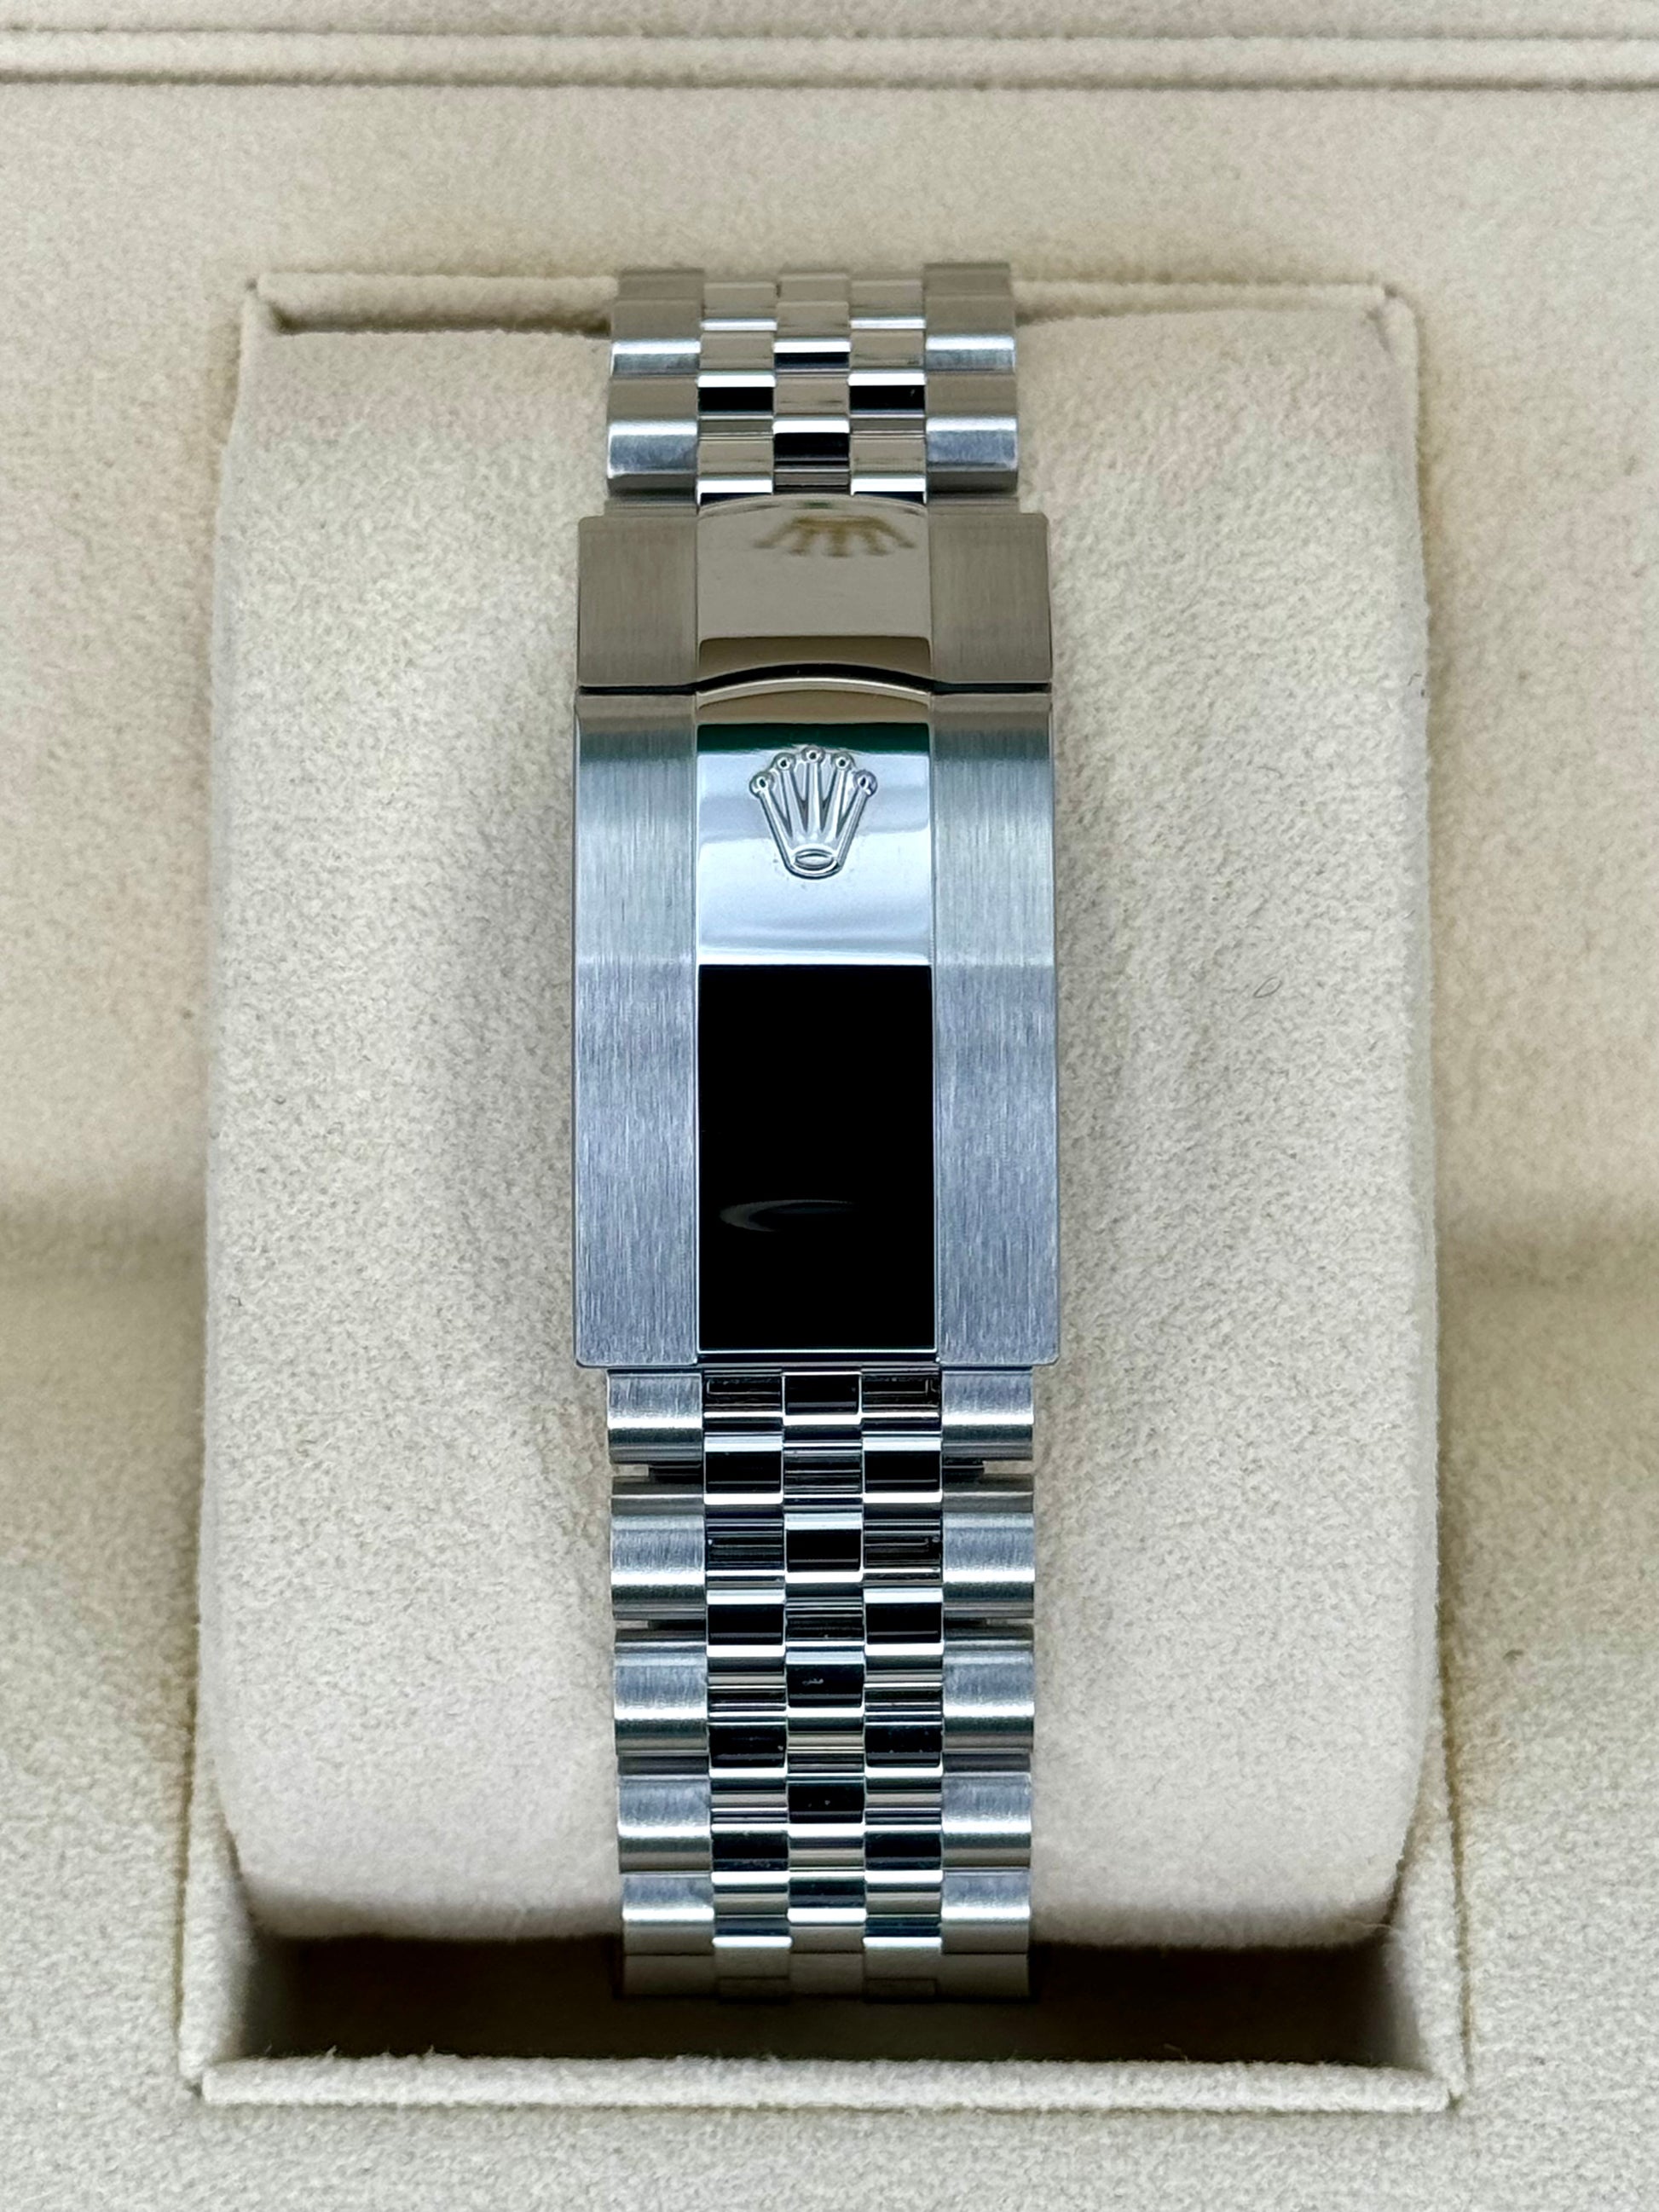 NEW 2023 Rolex Sky-Dweller 42mm 326934 Stainless Steel Jubilee Blue Dial - MyWatchLLC